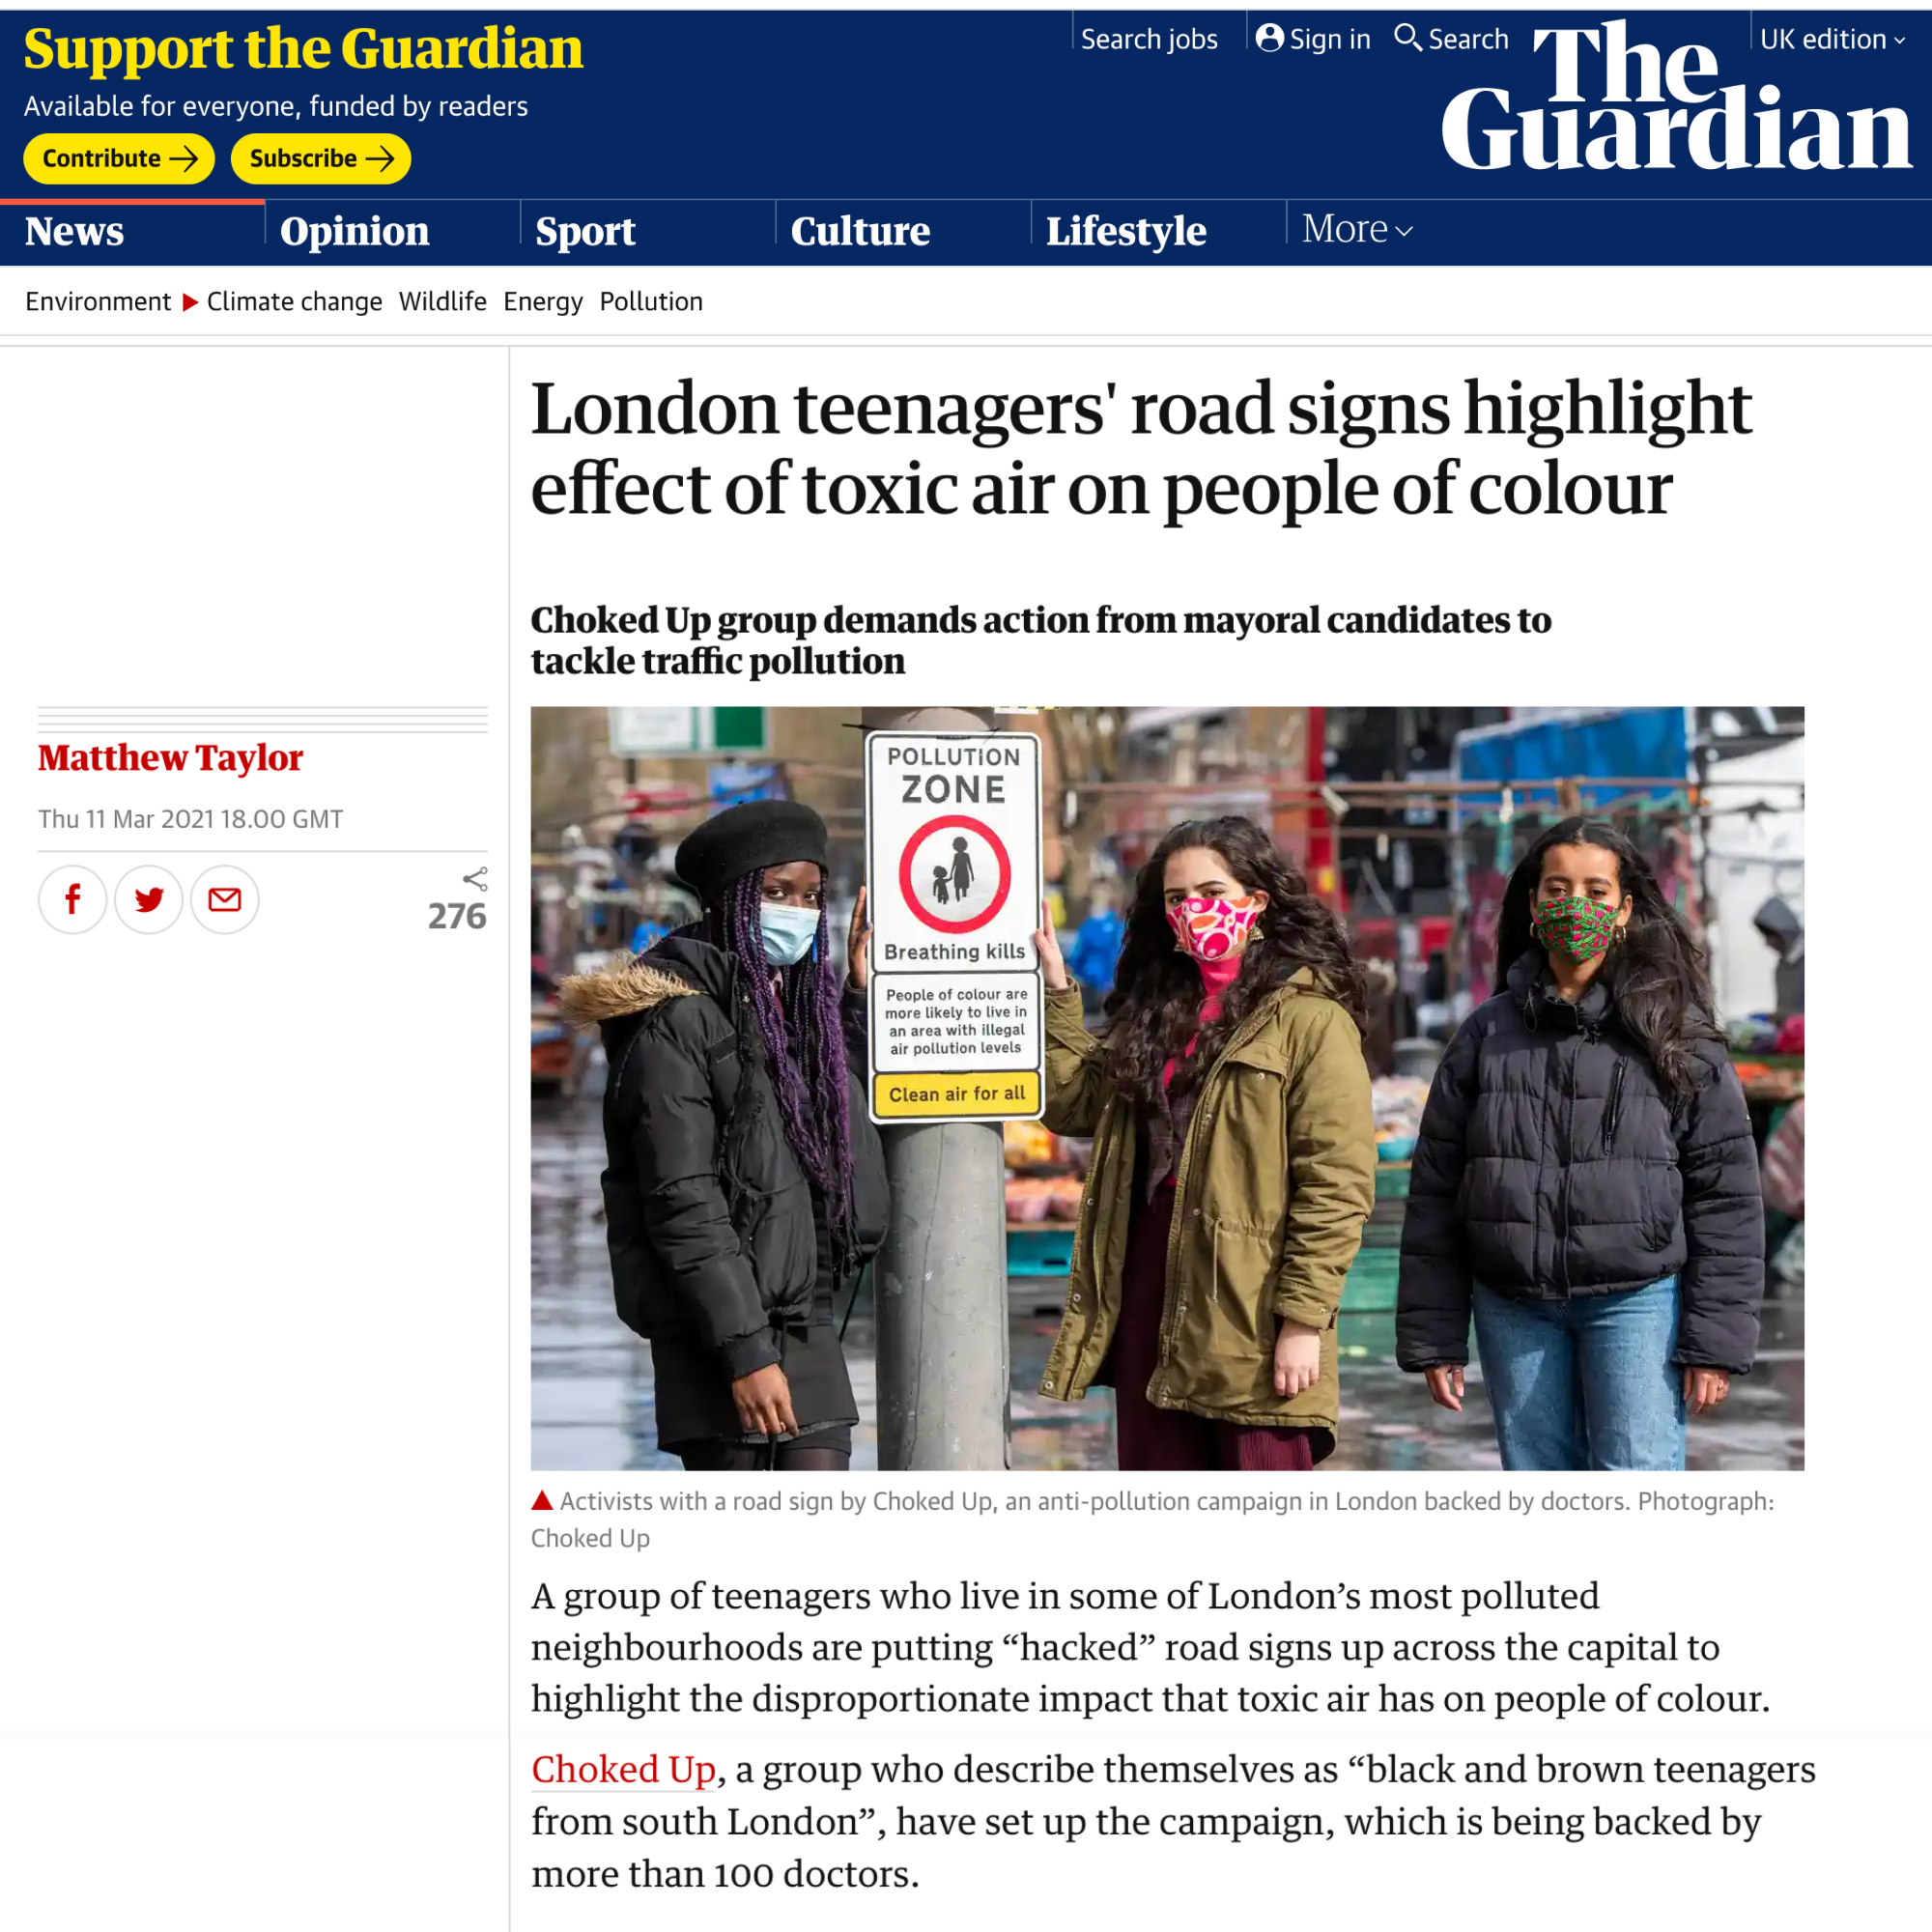 London teenagers’ road signs highlight effect of toxic air on people of colour